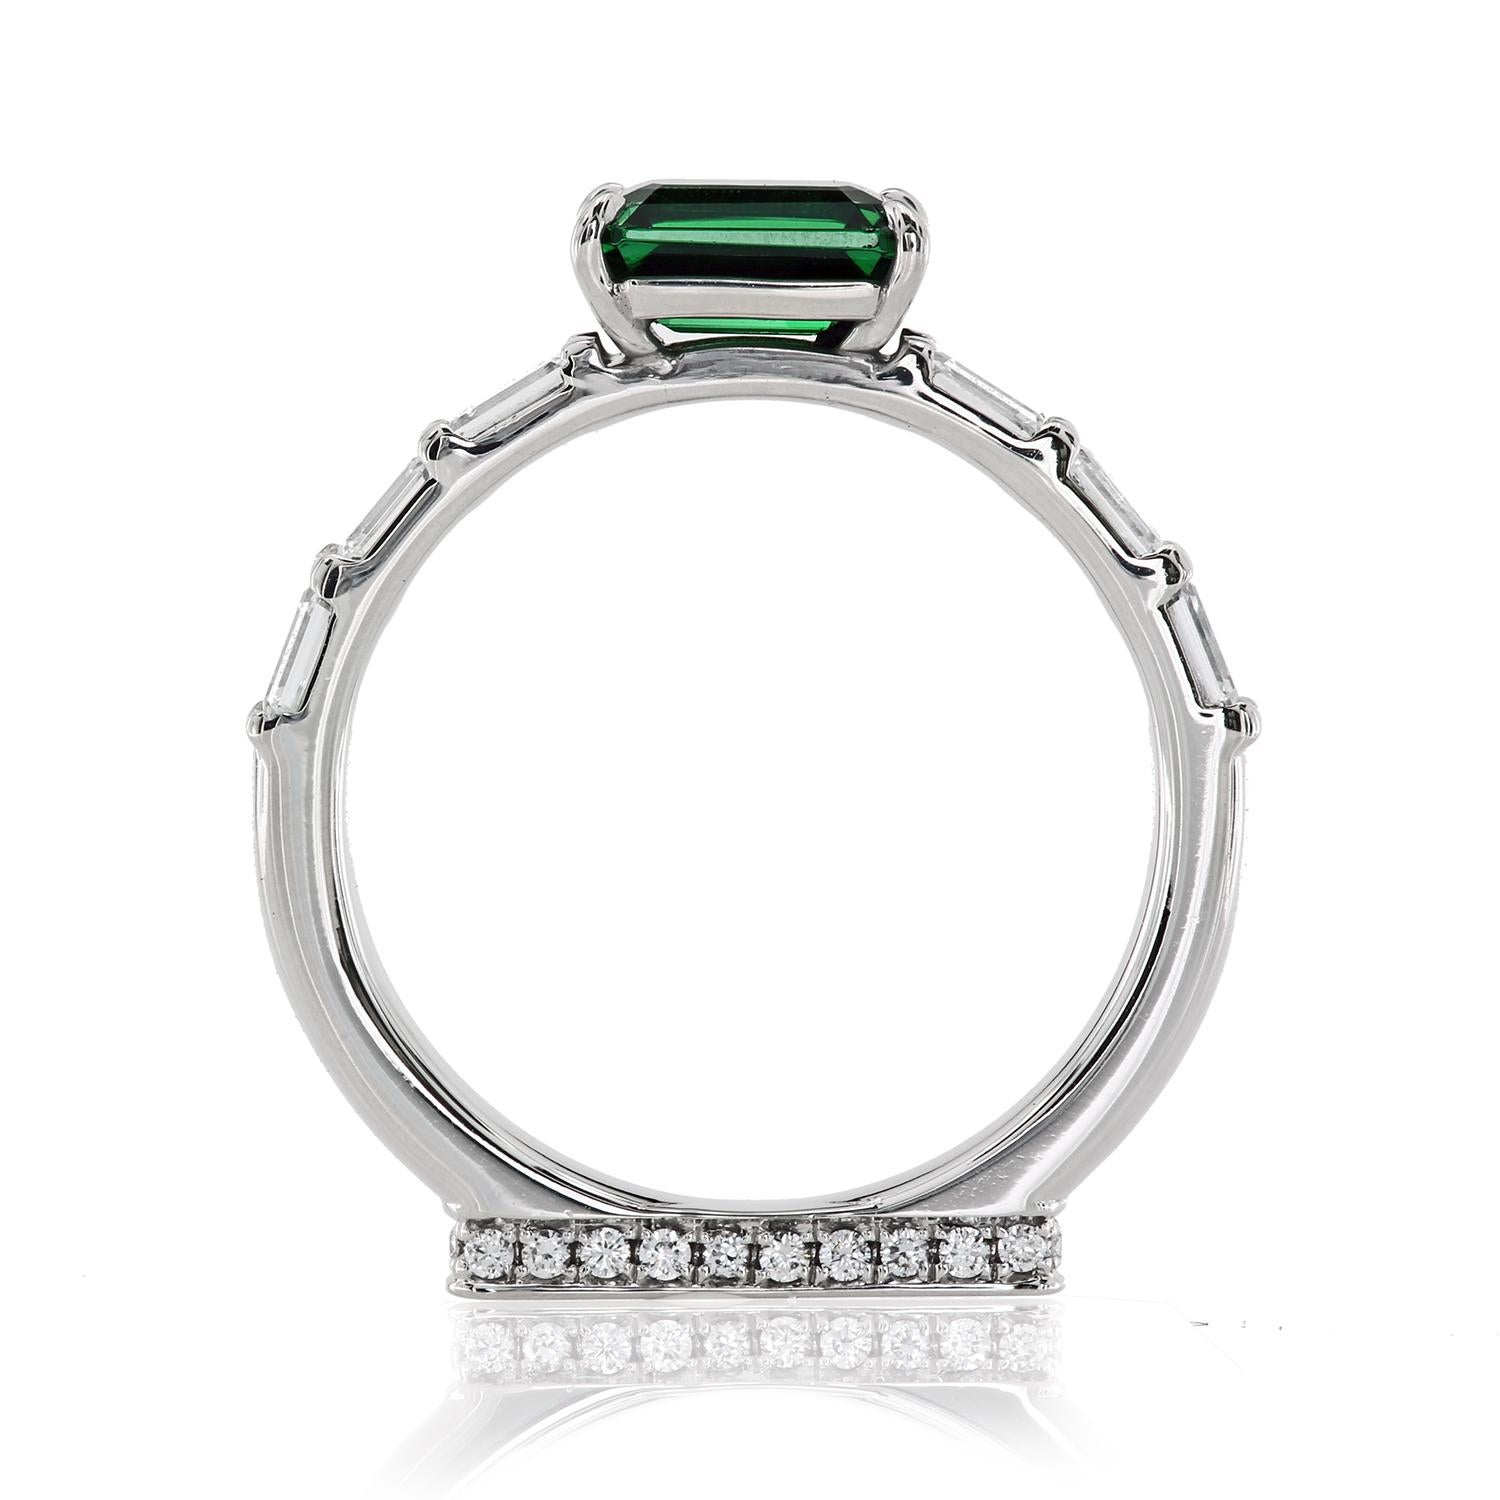 Leon Mege Platinum East-West Ring with 1.00-carat Emerald Cut Tsavorite  In New Condition For Sale In New York, NY